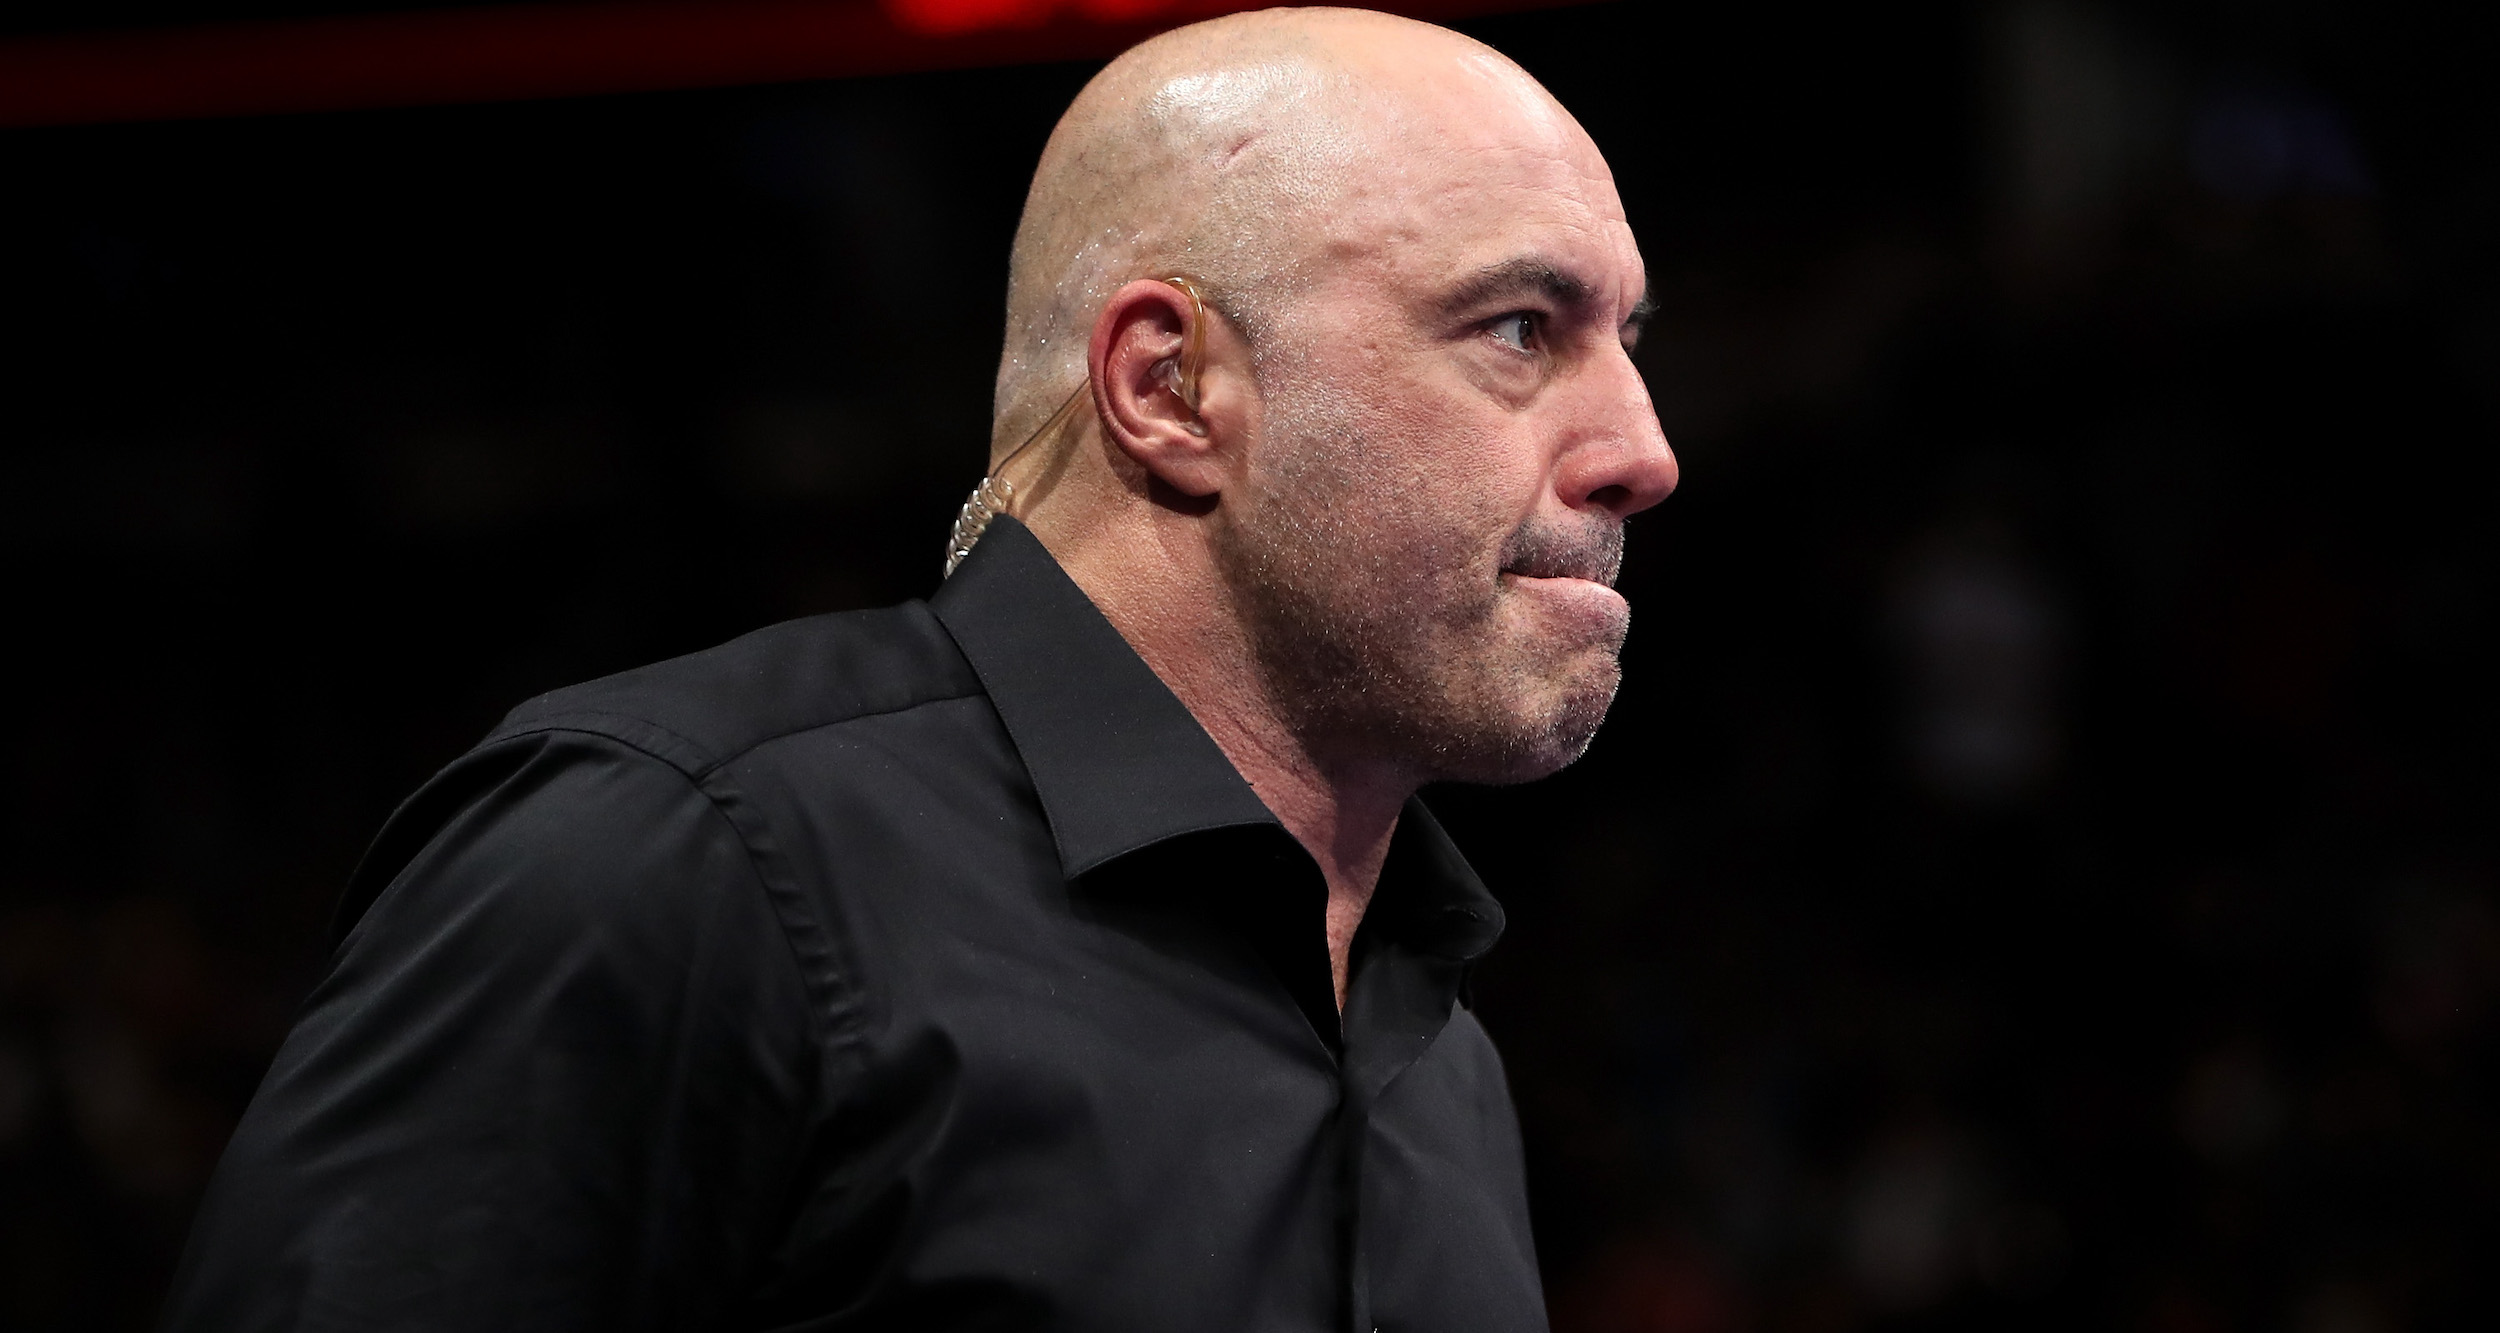 Joe Rogan on Spotify Disclaimer on Podcasts: 'I'm Very Happy With That'